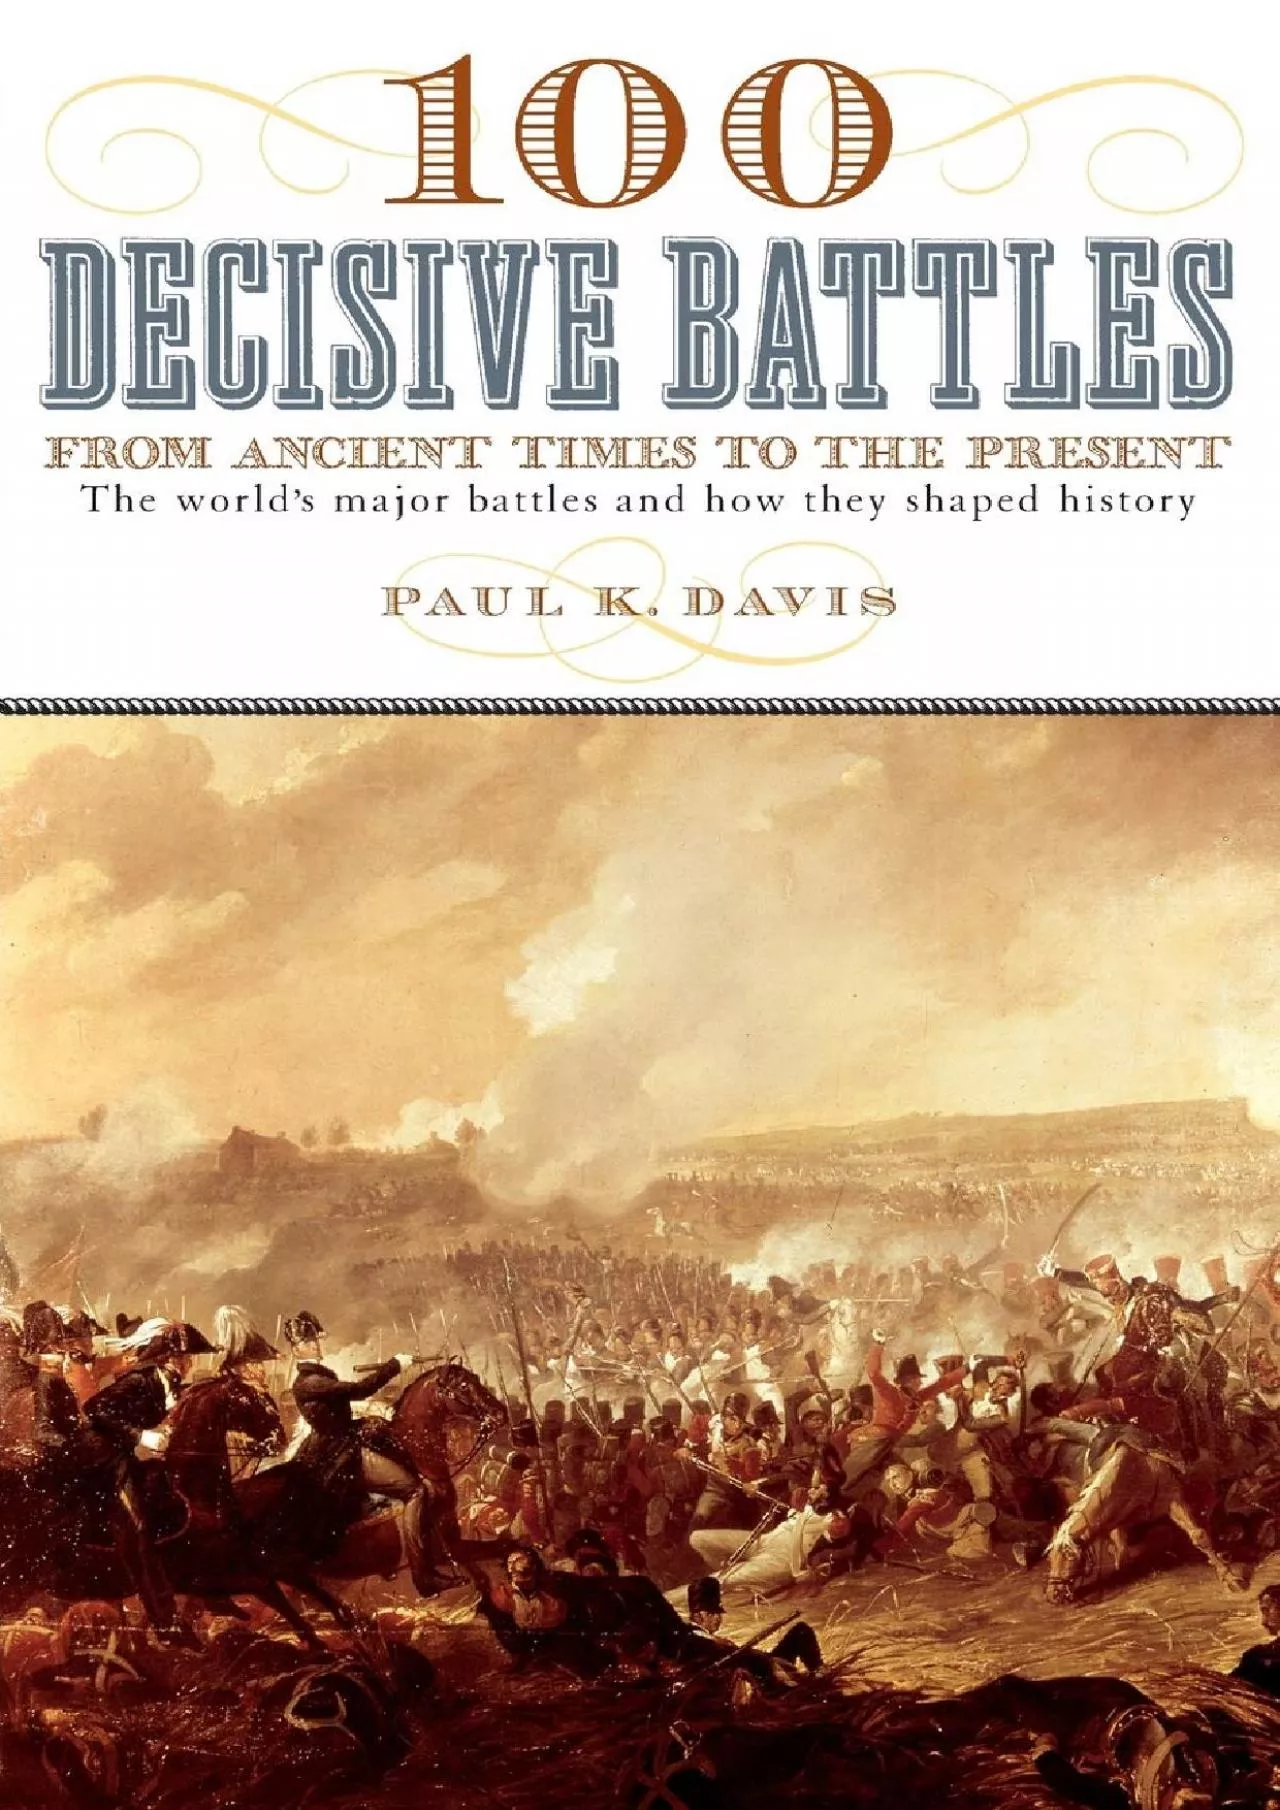 [EBOOK]-100 Decisive Battles: From Ancient Times to the Present